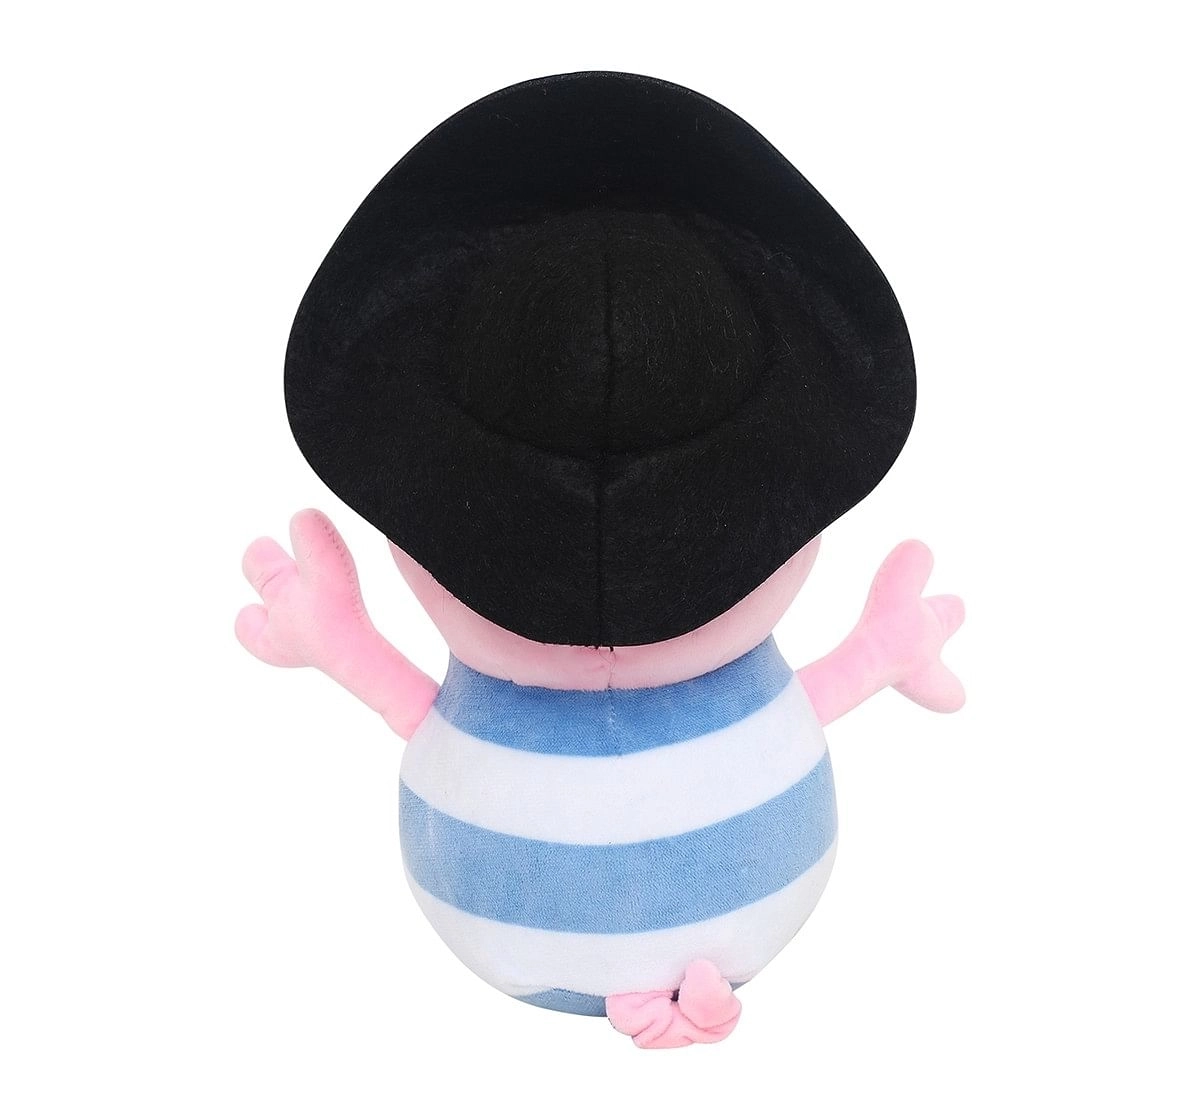 Peppa Pig In Pirate Costume Multi Color 30 Cm Soft Toy for Kids age 3Y+ - 30 Cm 